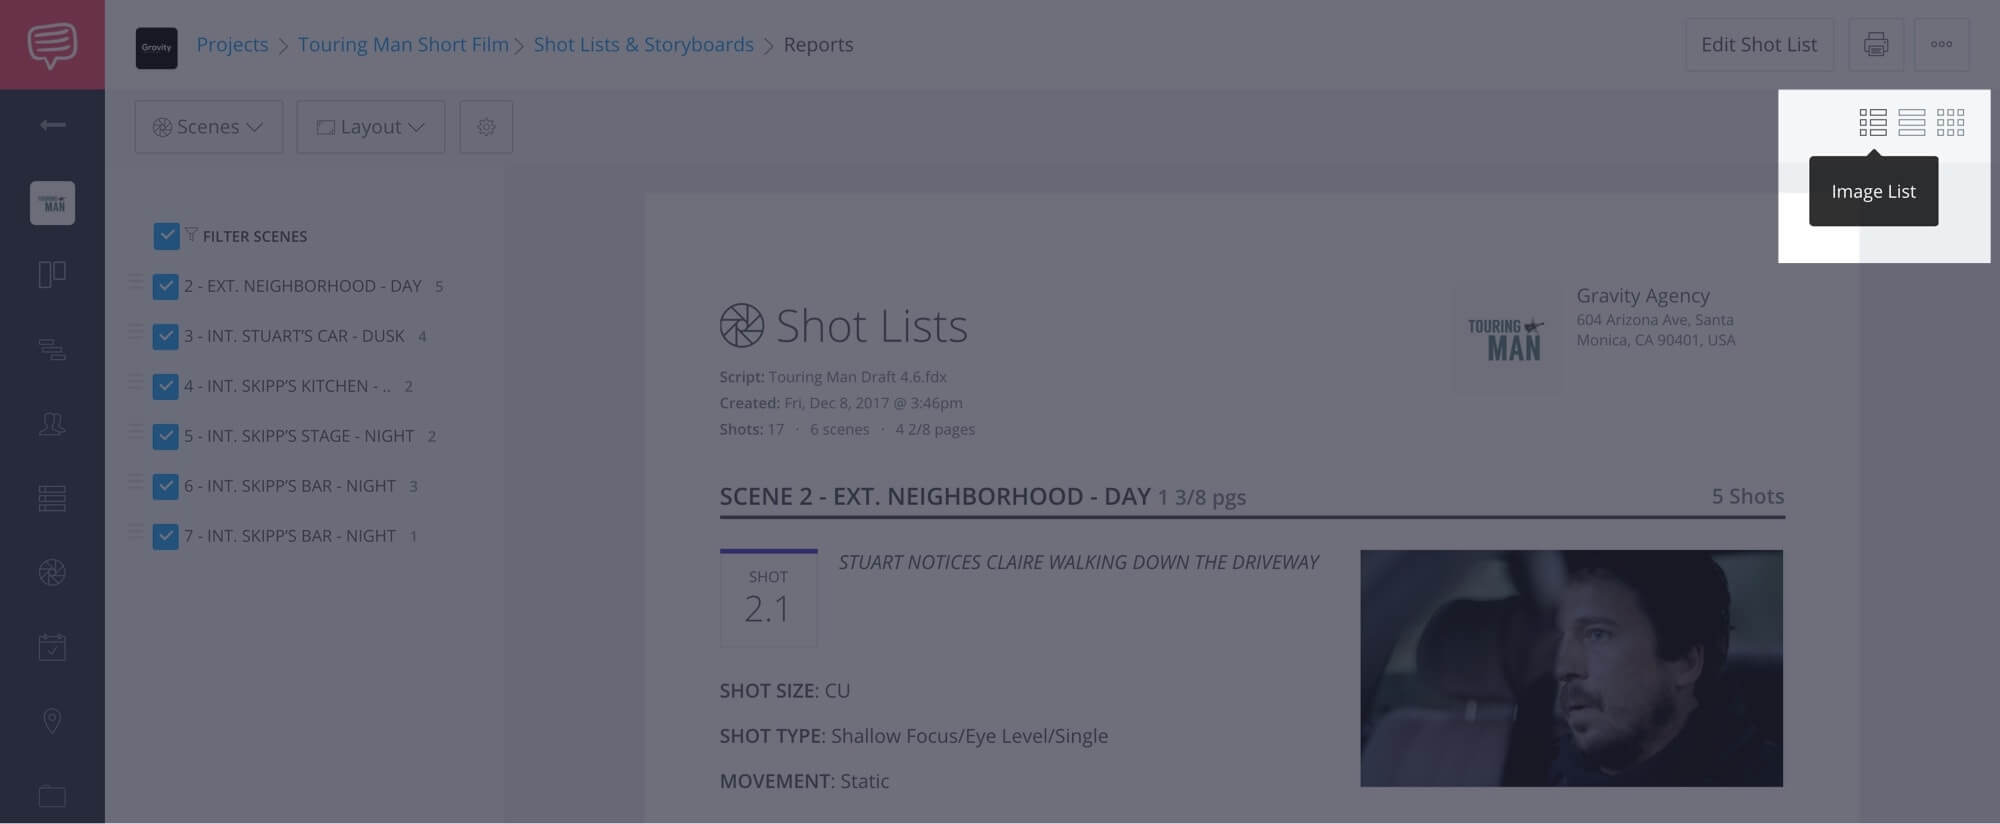 How to Create a Shot List with StudioBinder - Shot List Creator Template - 24